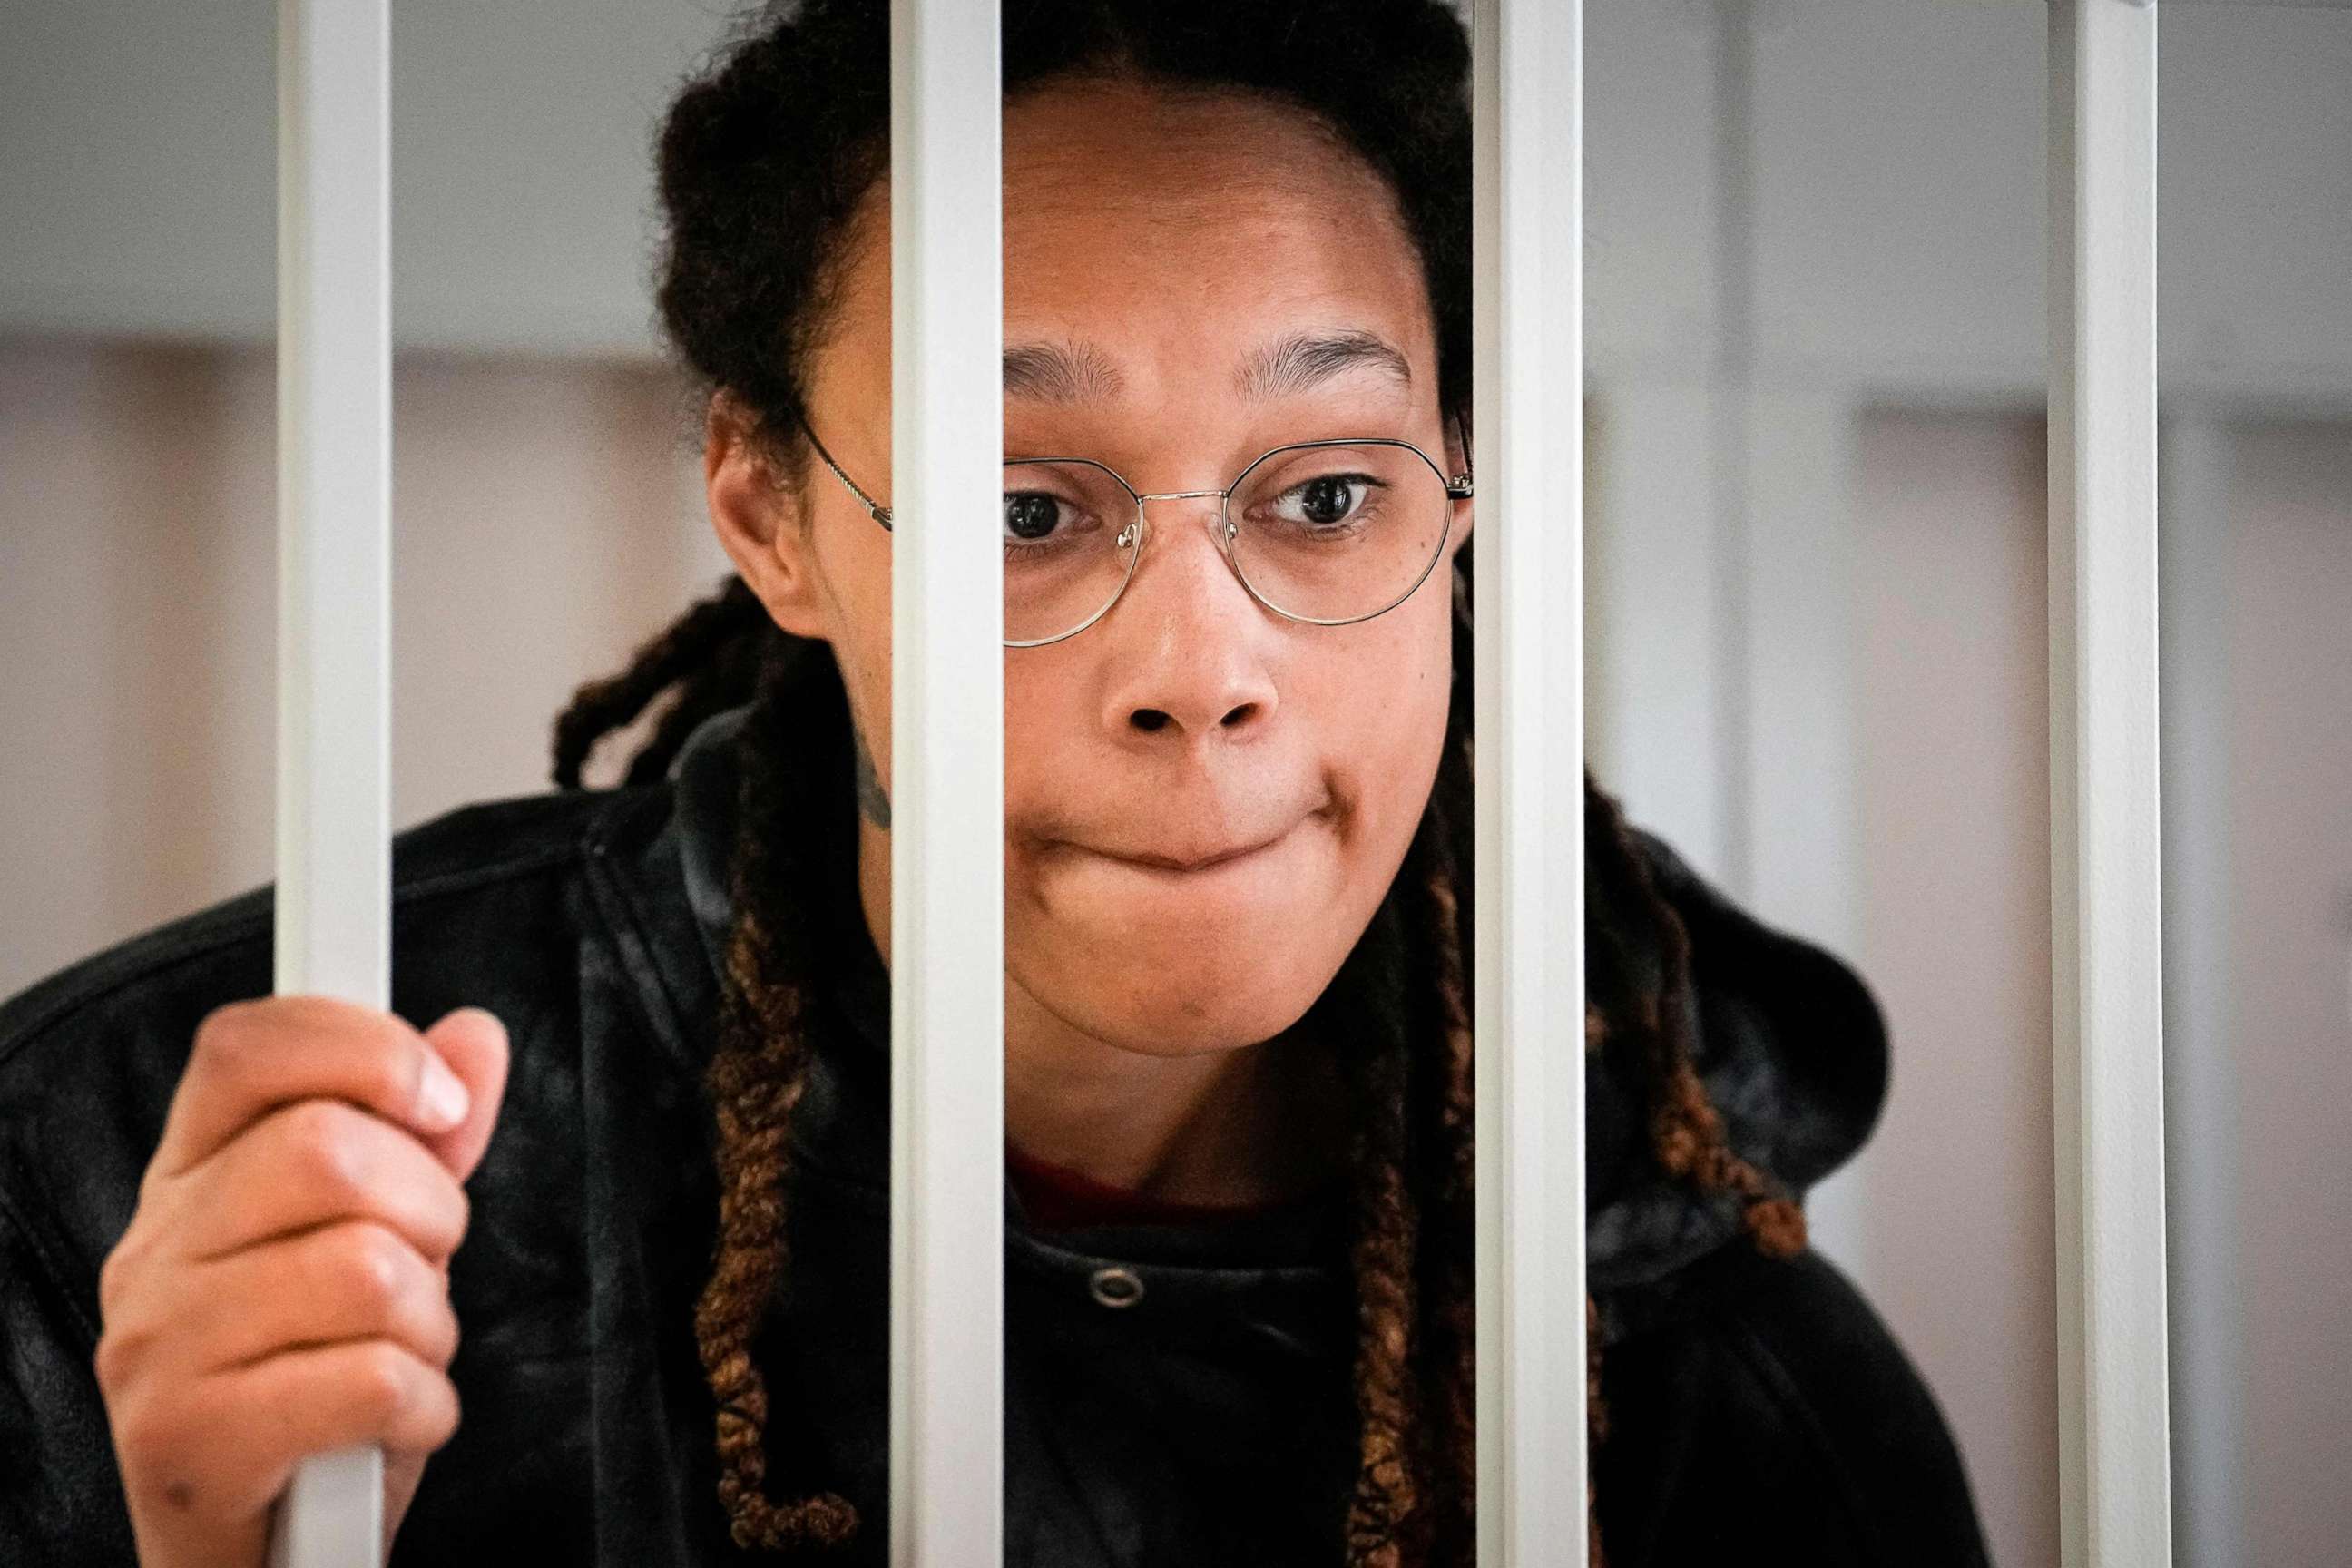 PHOTO: Brittney Griner reacts inside a defendants' cage before a hearing at the Khimki Court, outside Moscow, July 26, 2022.